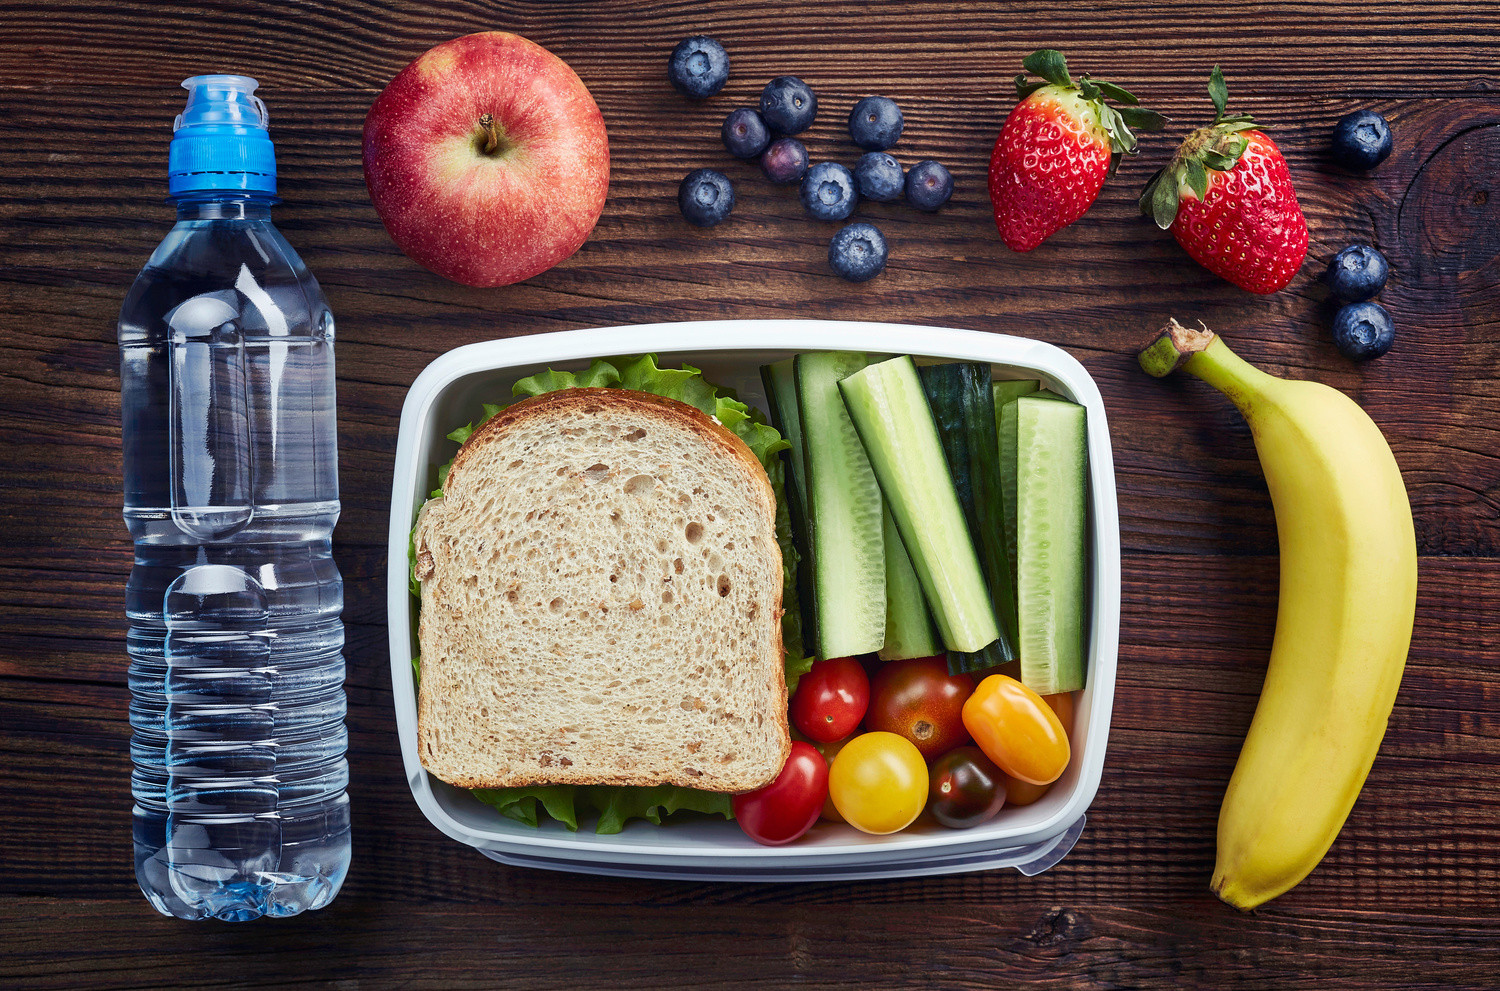 Healthy Snacks To Bring To School
 Ways for Parents to Improve Their Children’s School